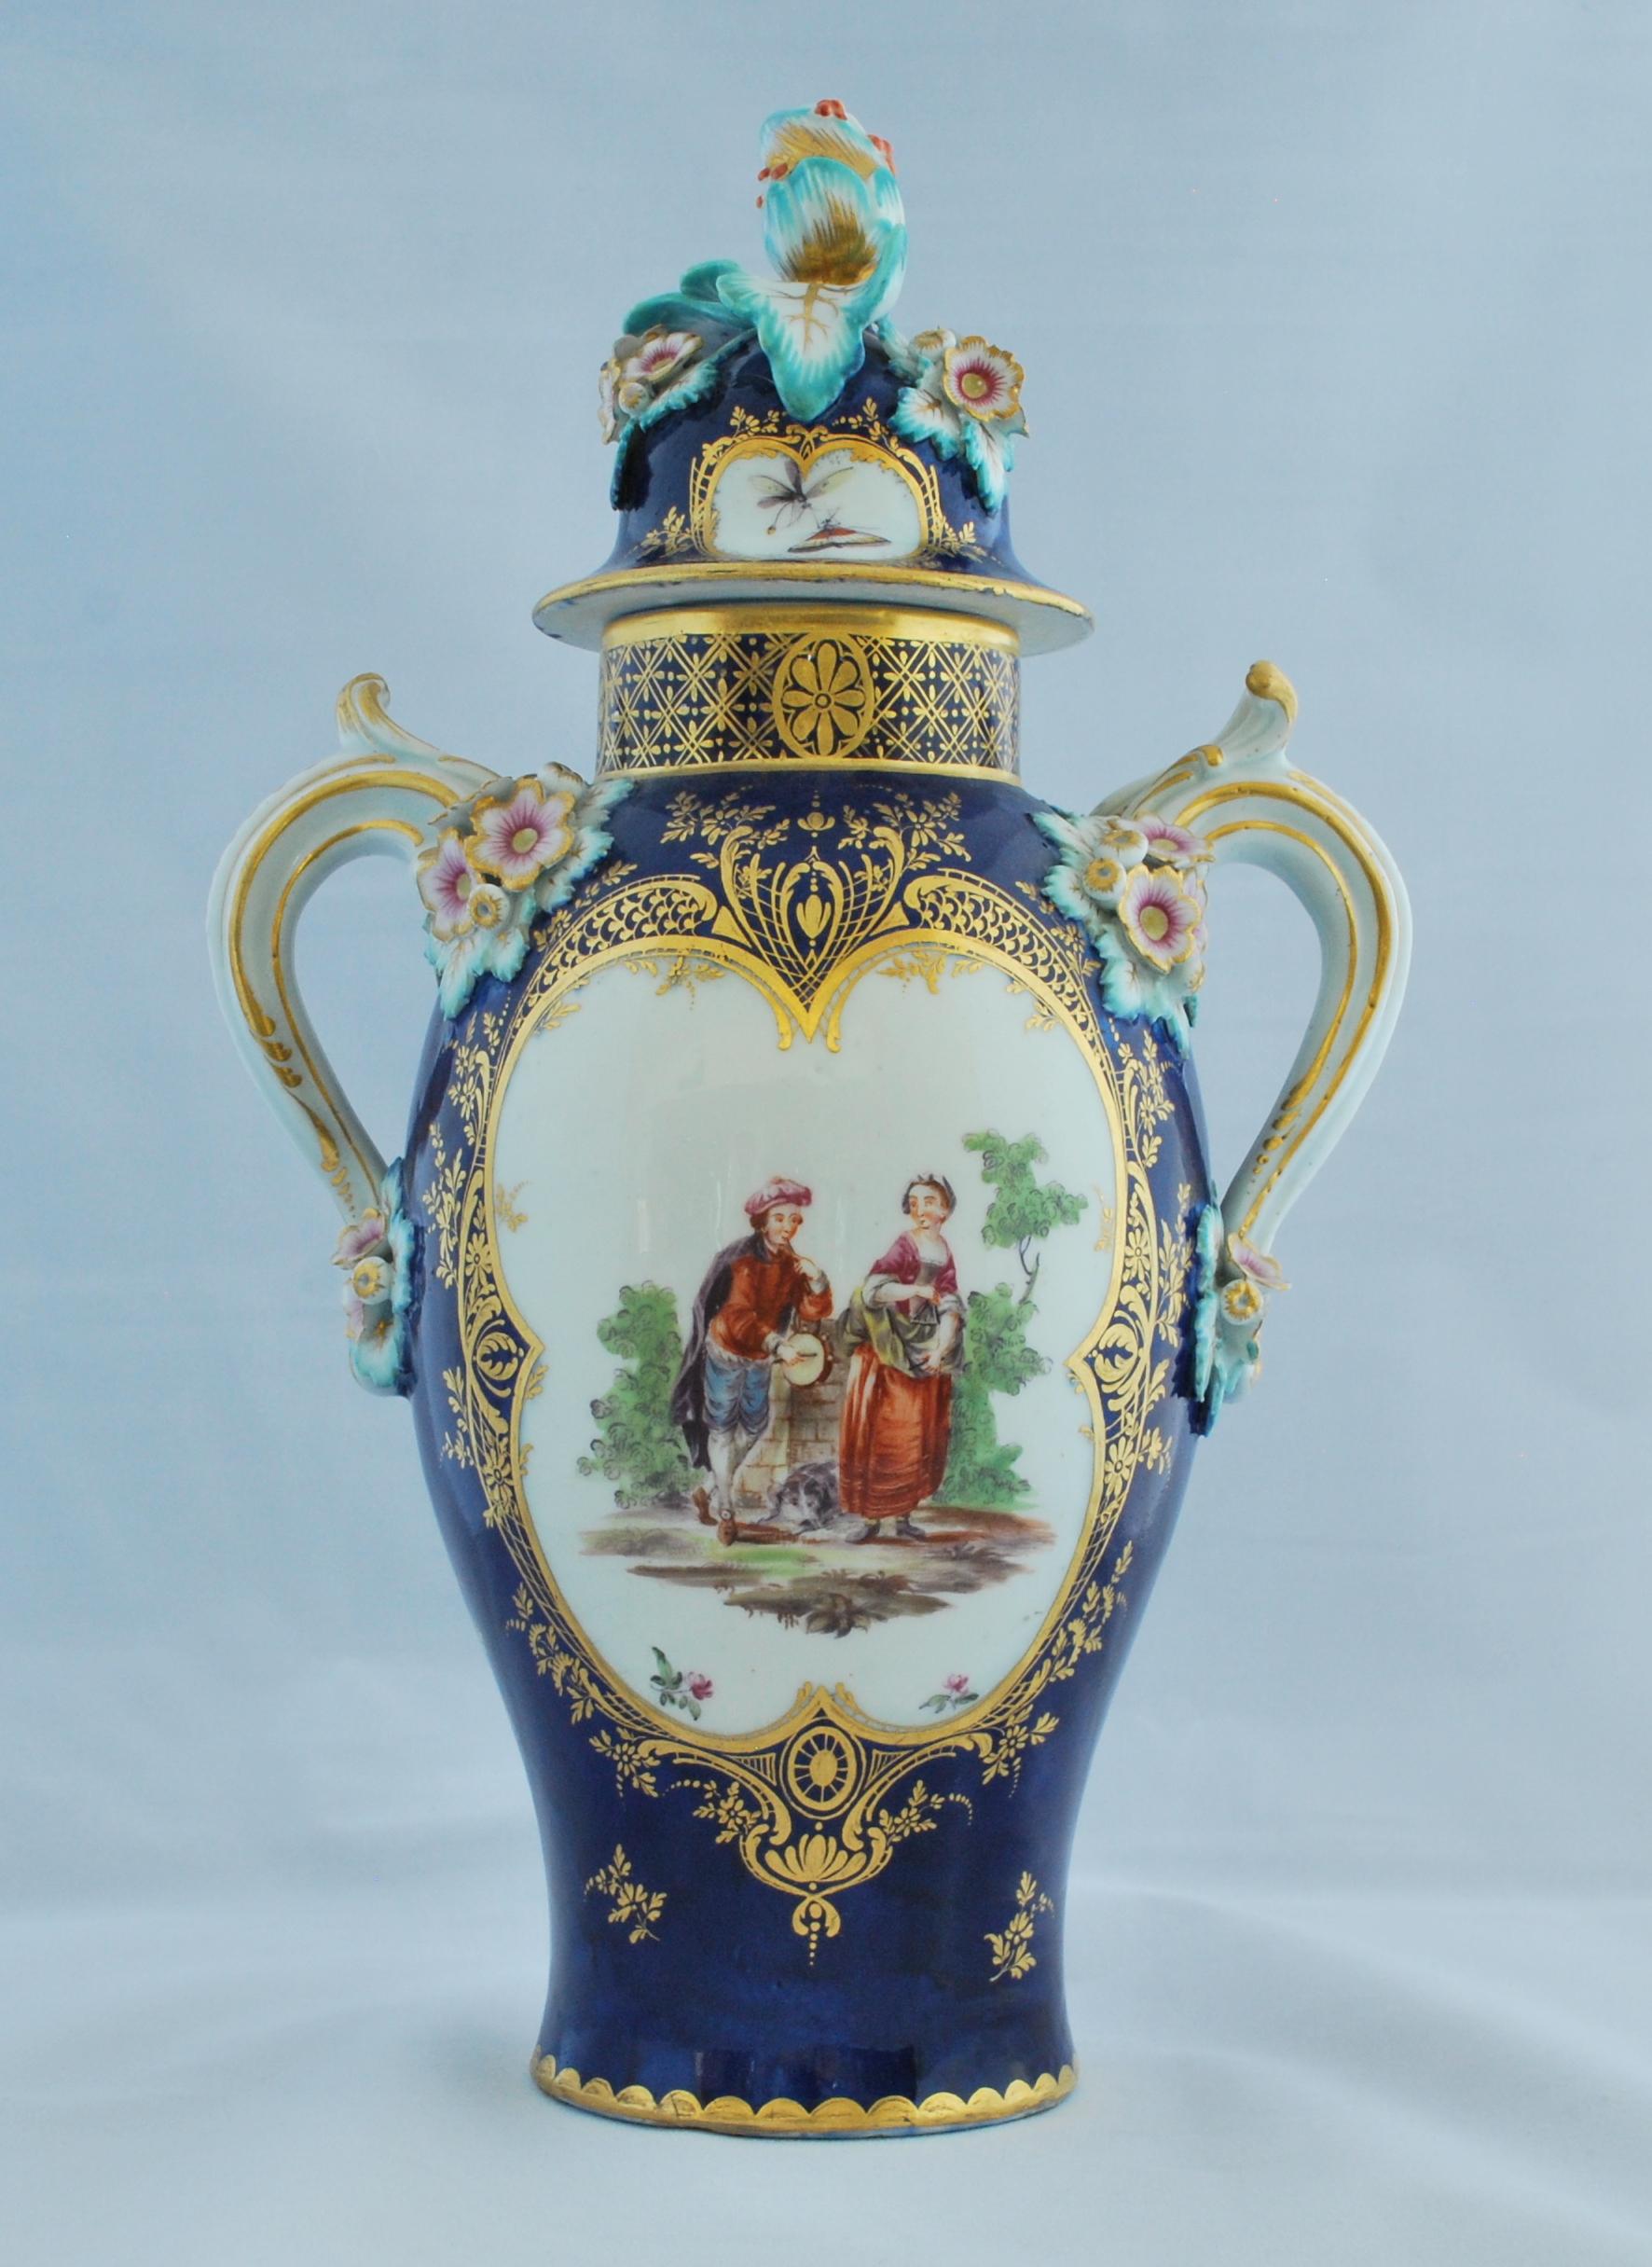 Derby was able to produce exceptional work, and these vases are a brilliant example of what they were capable of, when making for the top of the market. The body, the modeling, and the painting are all examples of the very best English porcelain of